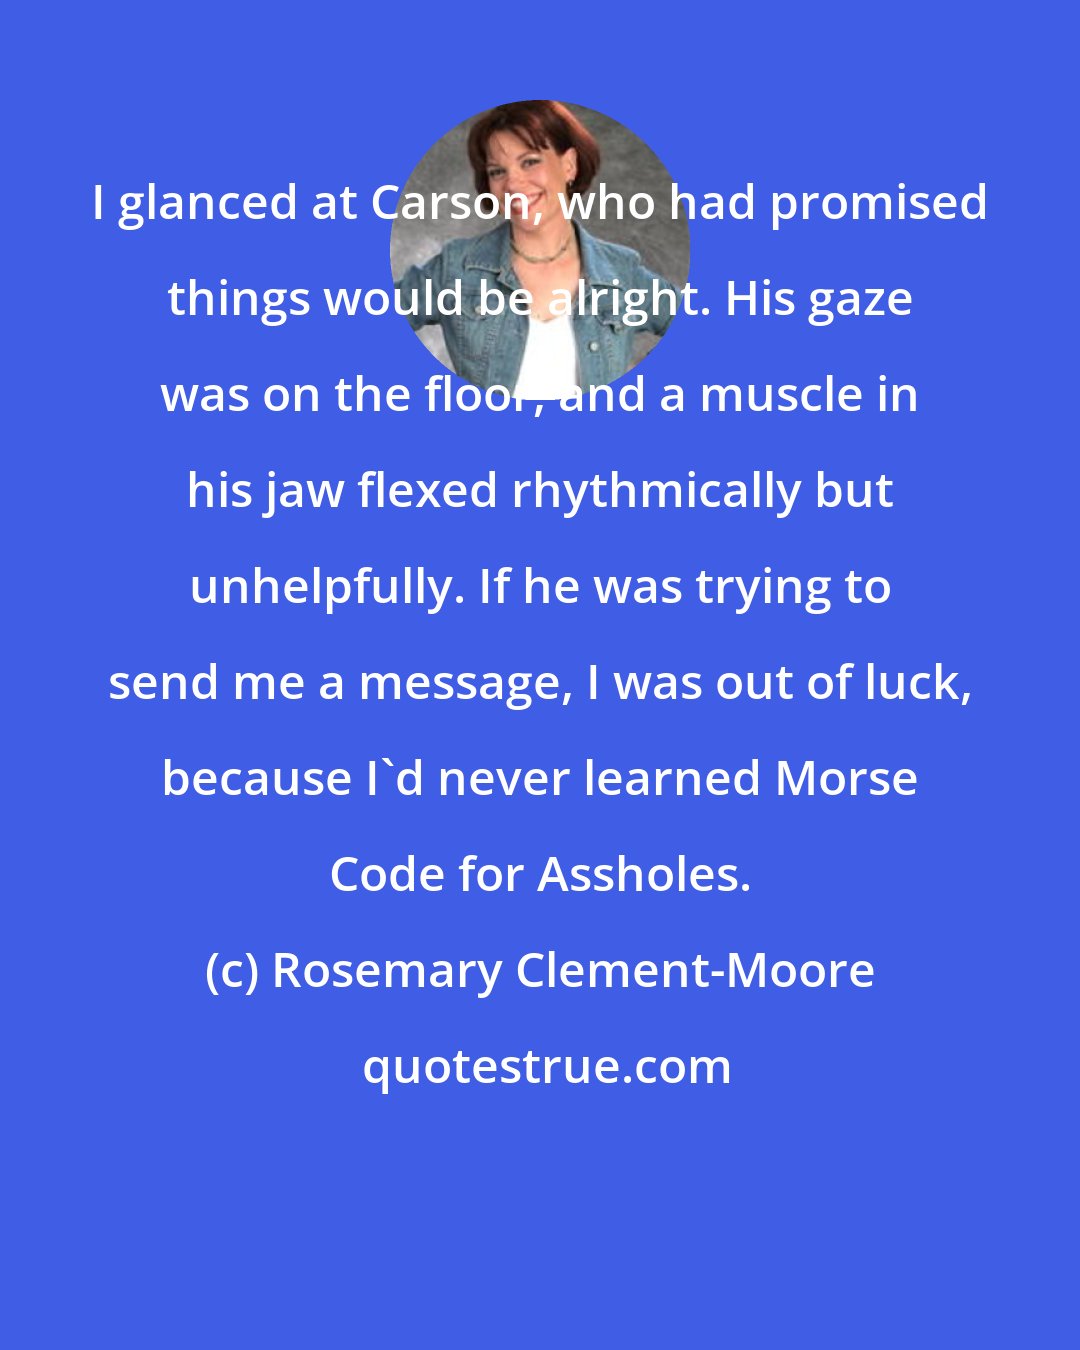 Rosemary Clement-Moore: I glanced at Carson, who had promised things would be alright. His gaze was on the floor, and a muscle in his jaw flexed rhythmically but unhelpfully. If he was trying to send me a message, I was out of luck, because I'd never learned Morse Code for Assholes.